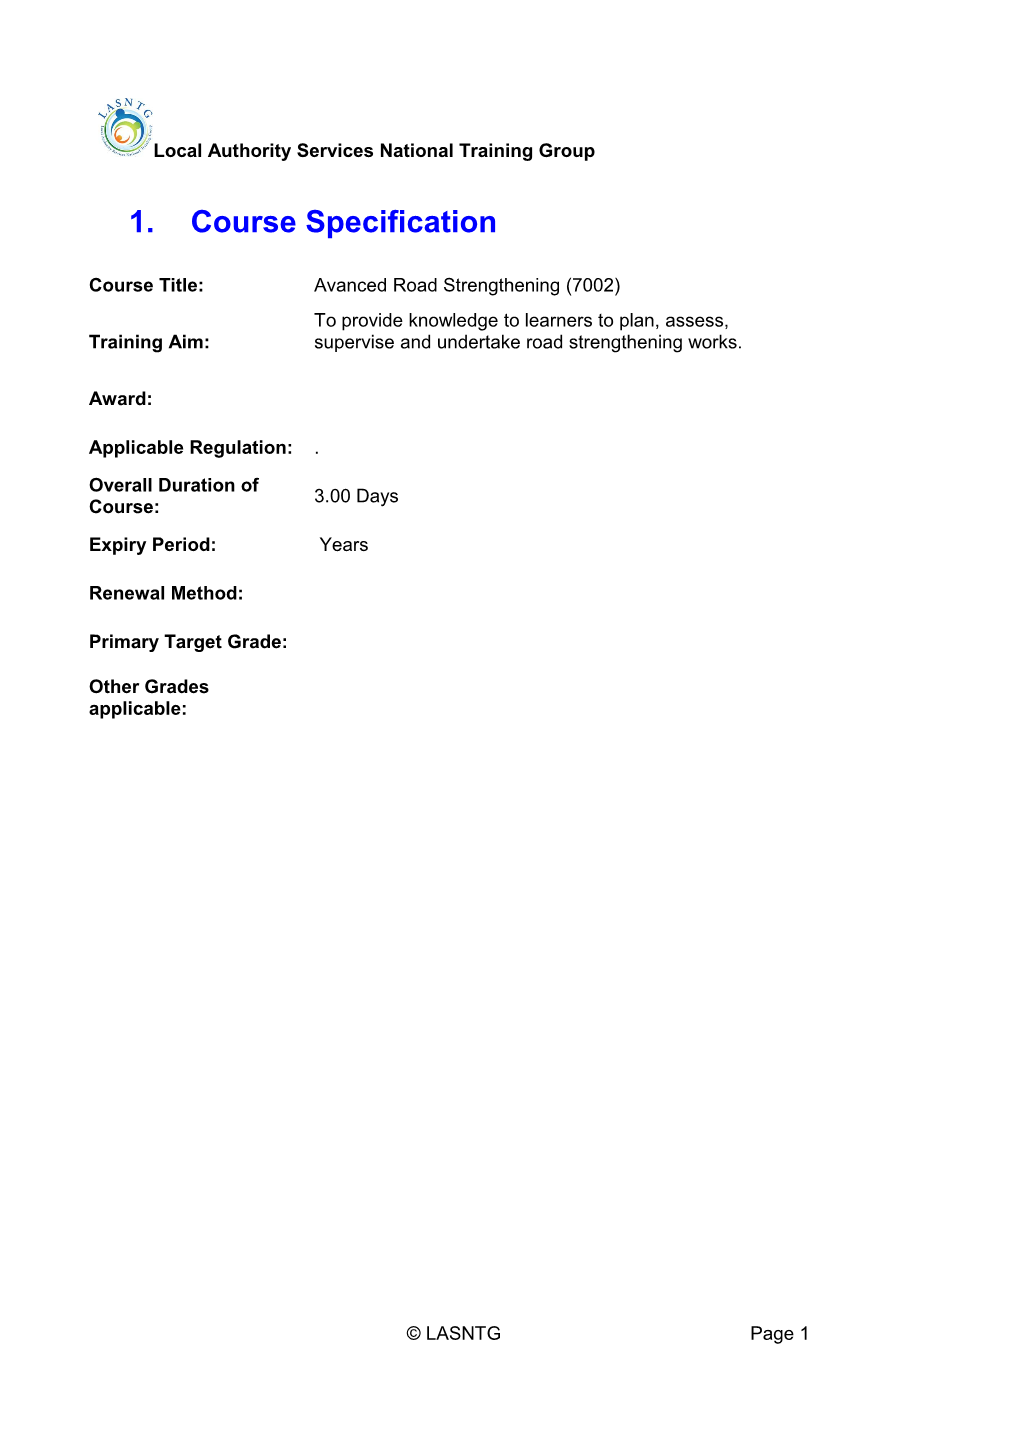 Course Specification s3